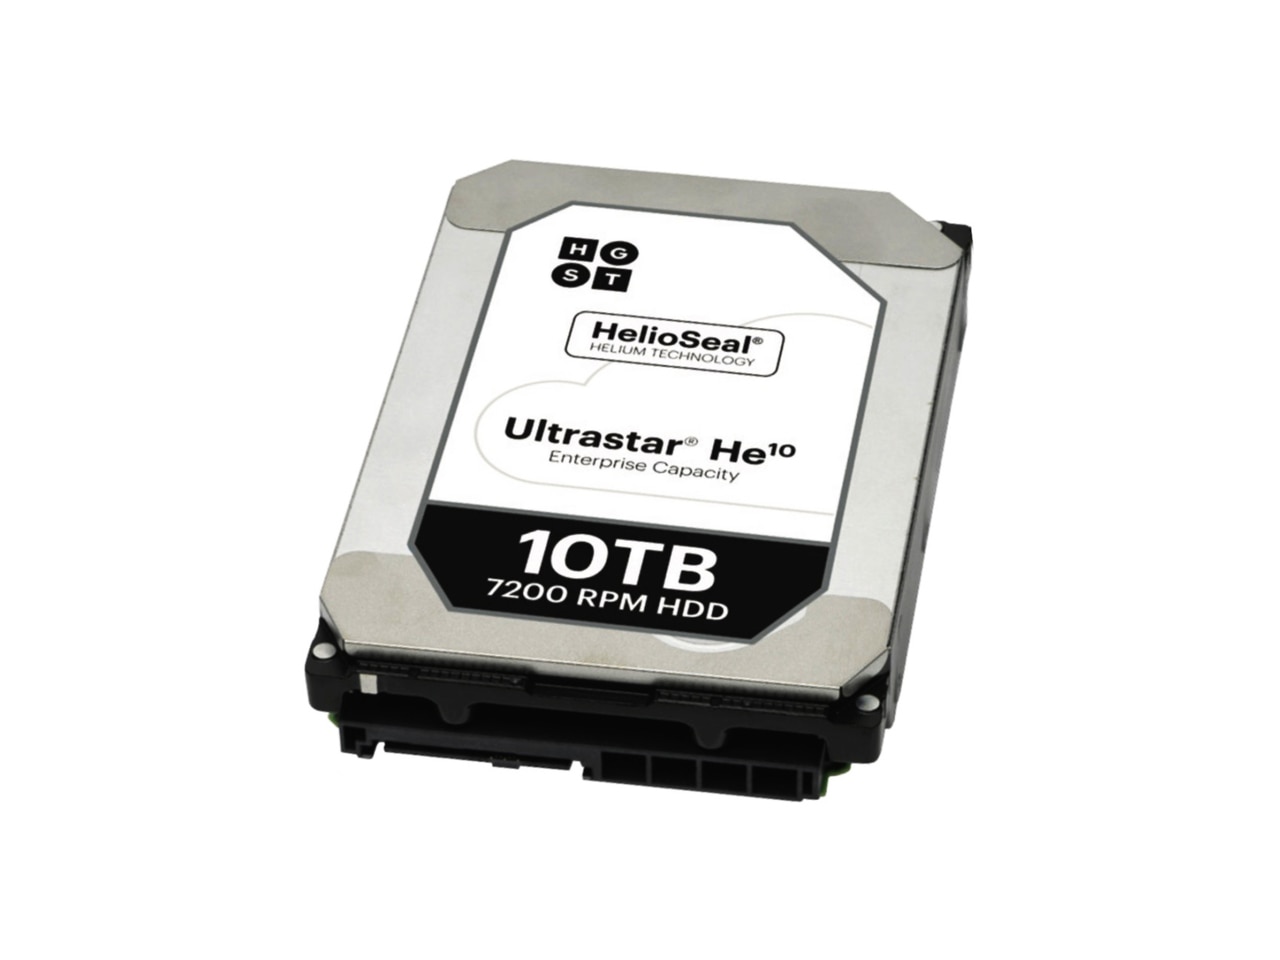 He10 10tb Sata 512e Ise Hgst Int Hdd Mobile Consumer 0f27452 8717306635684